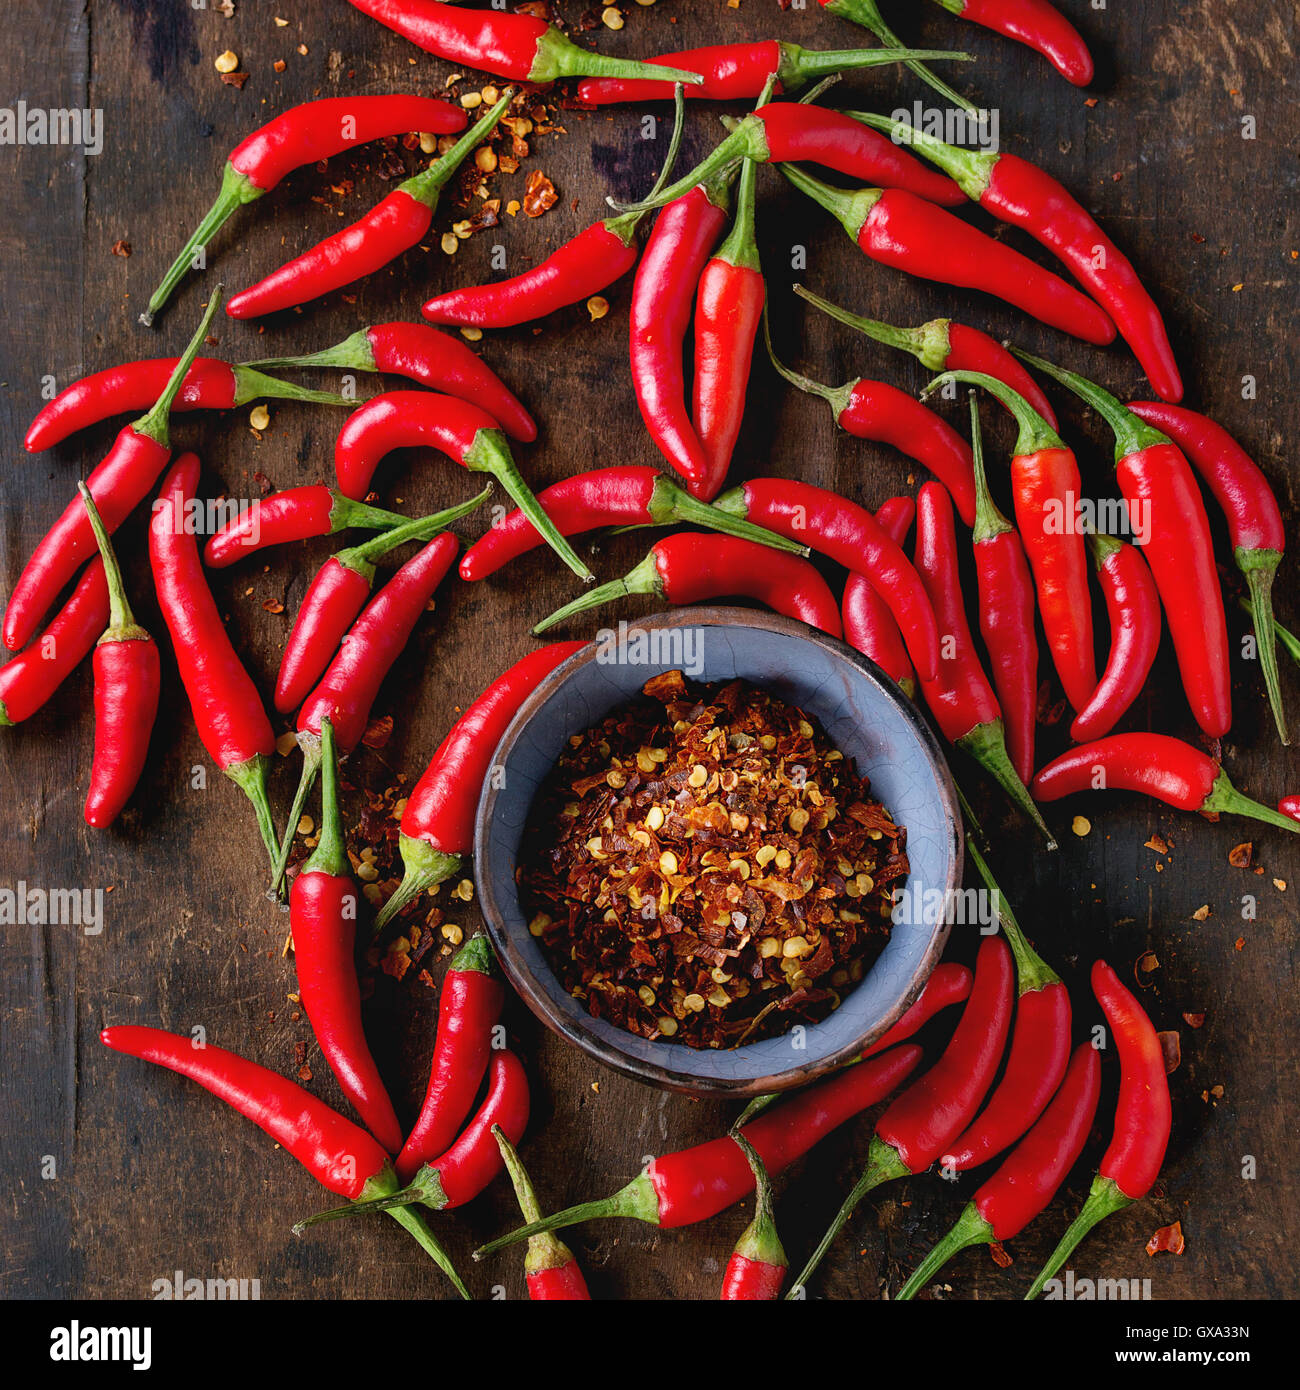 Heap of red hot chili peppers Stock Photo